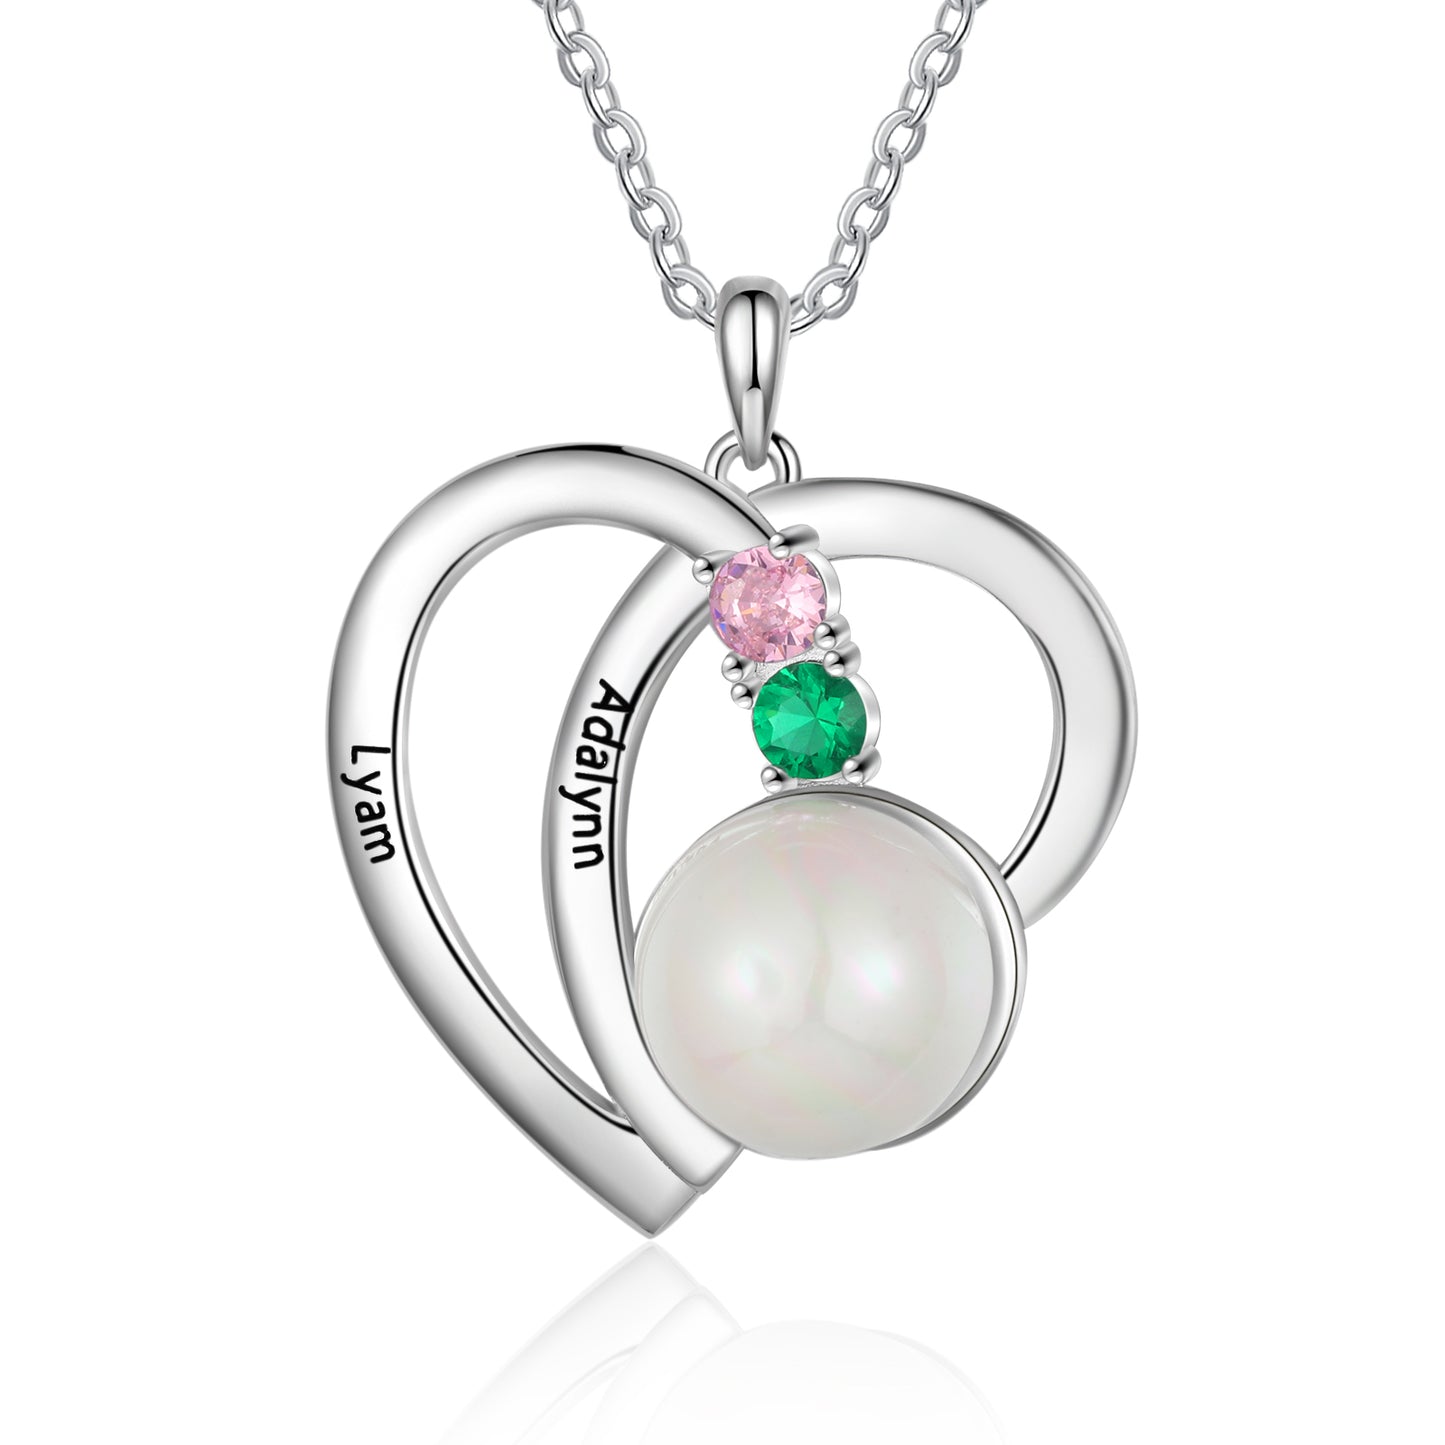 Personalized Heart Shaped Necklace with Pearl